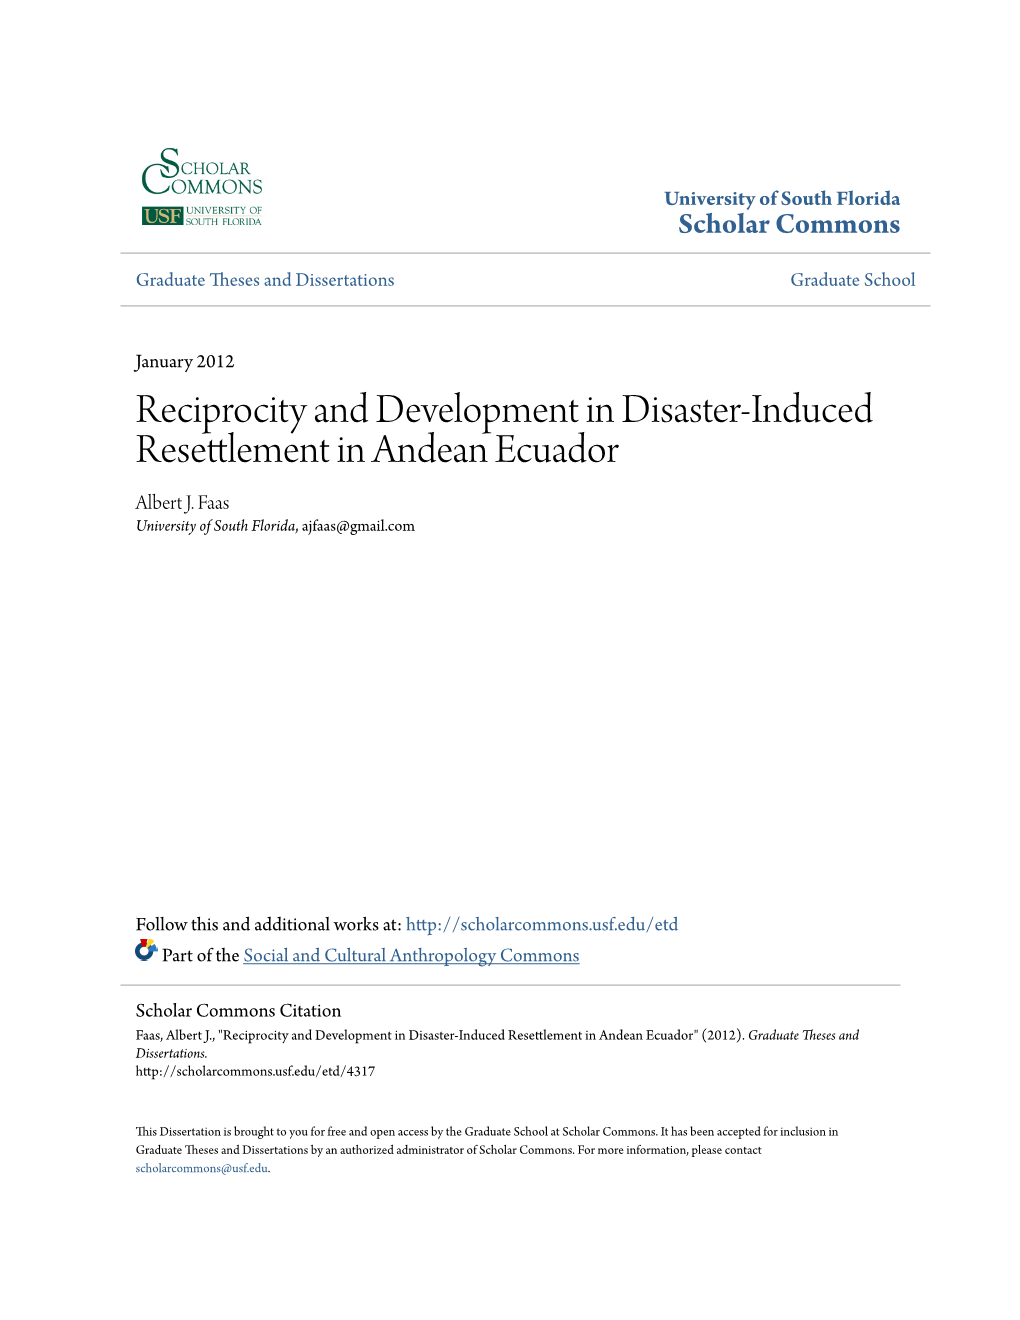 Reciprocity and Development in Disaster-Induced Resettlement in Andean Ecuador Albert J